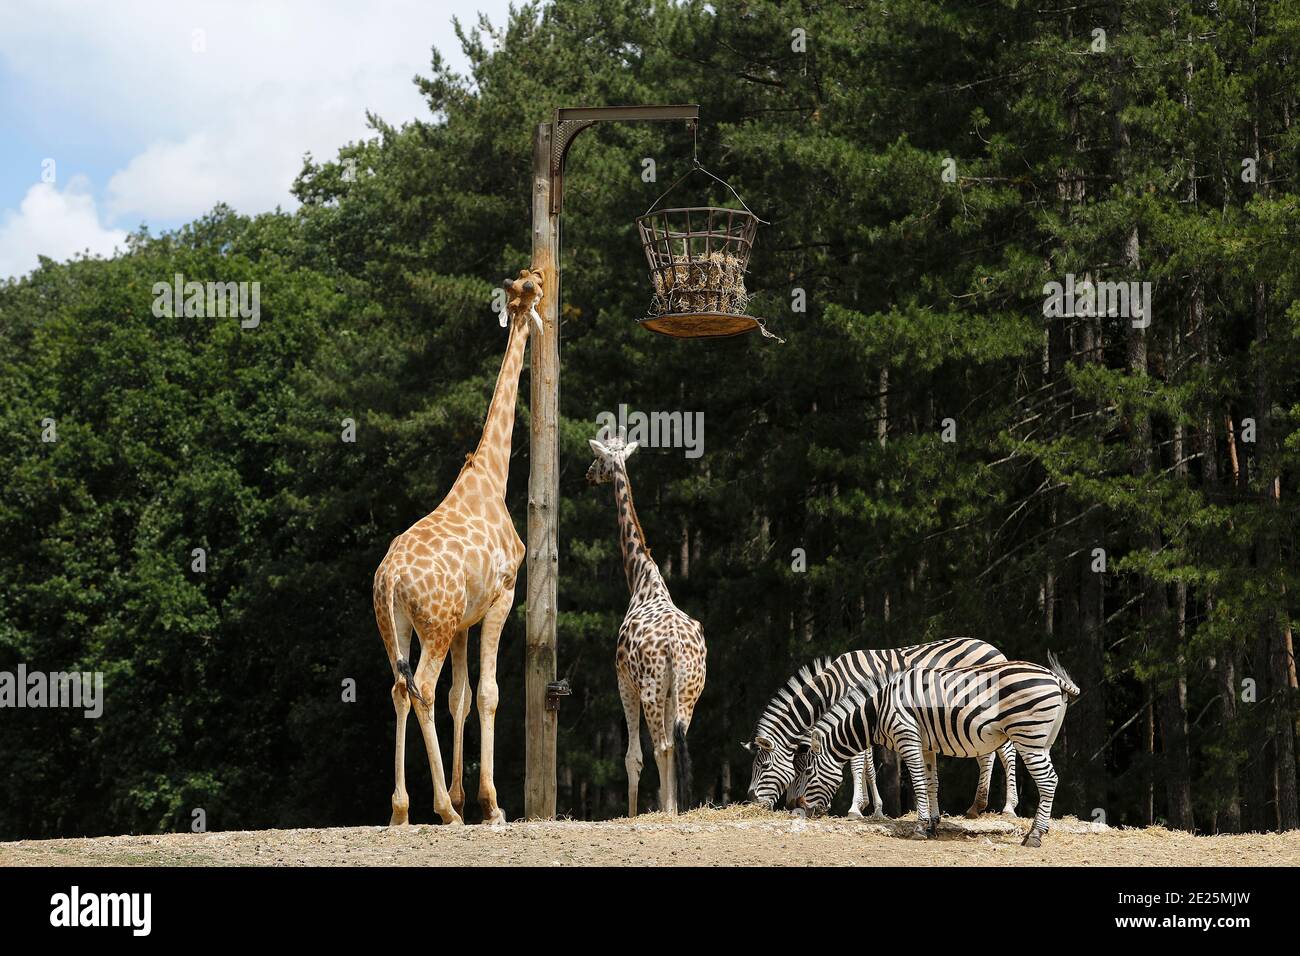 Zebras and giraffes in Thoiry zoo park, France Stock Photo